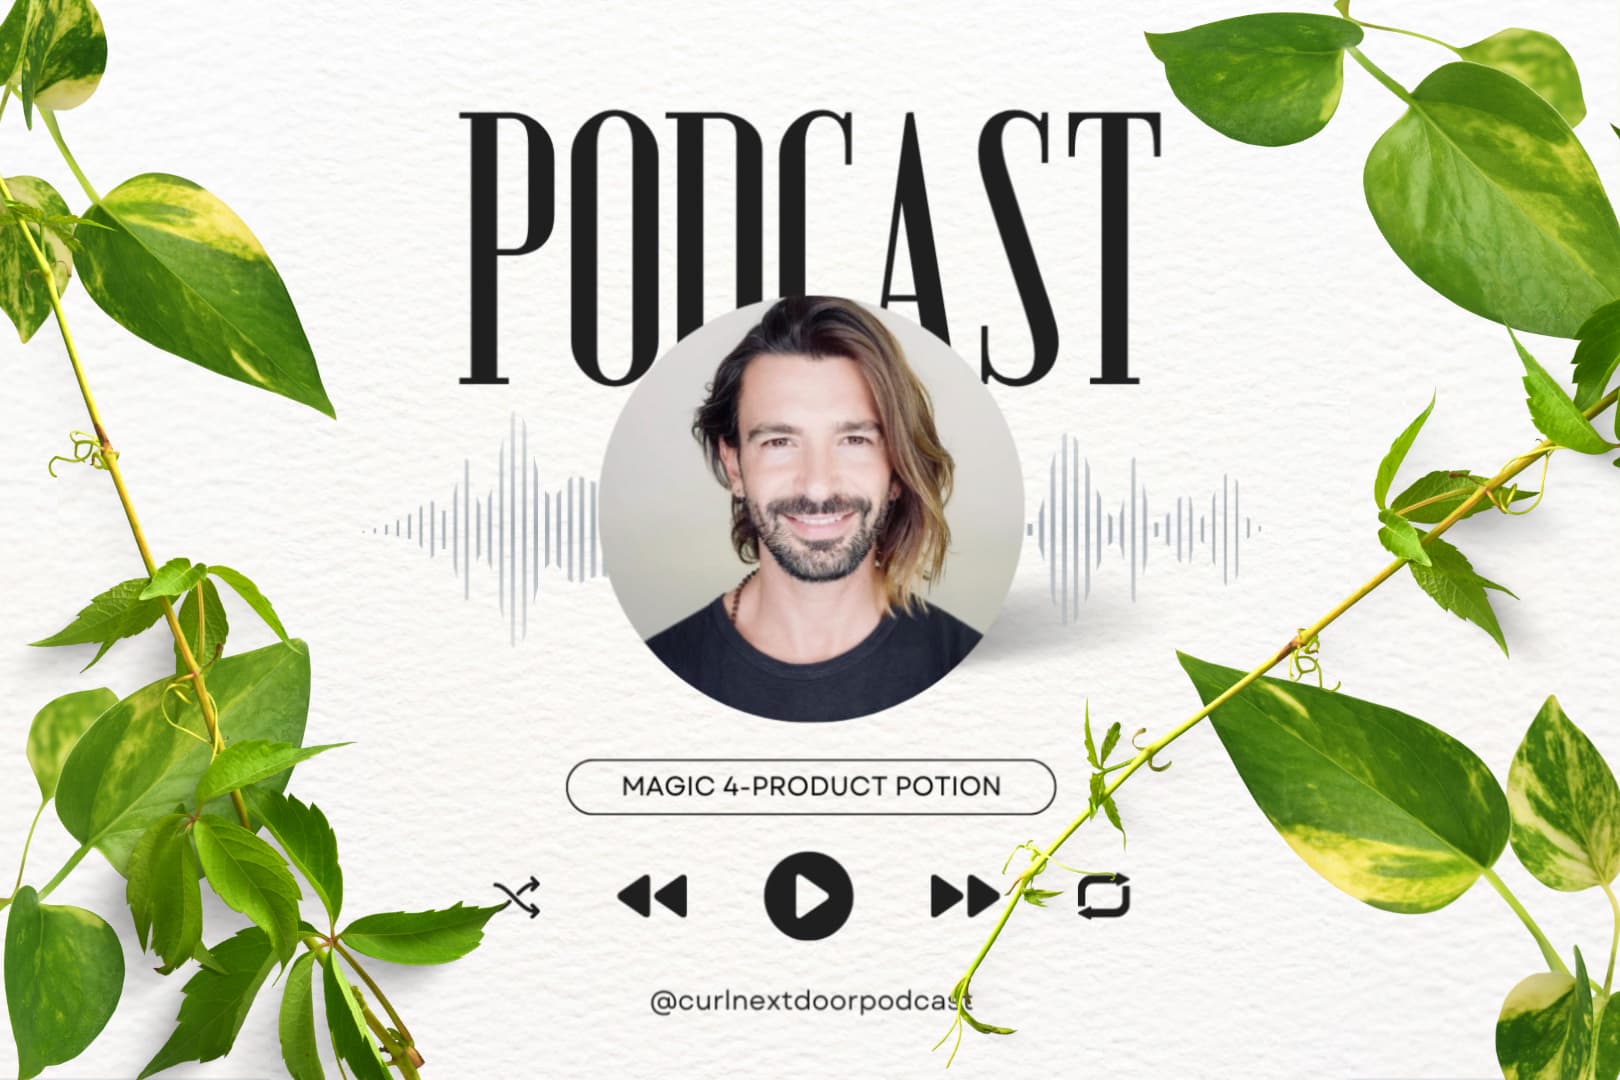 Luis Pacheco TO112 Founder Curl Next Door Podcast Magic 4 Potion